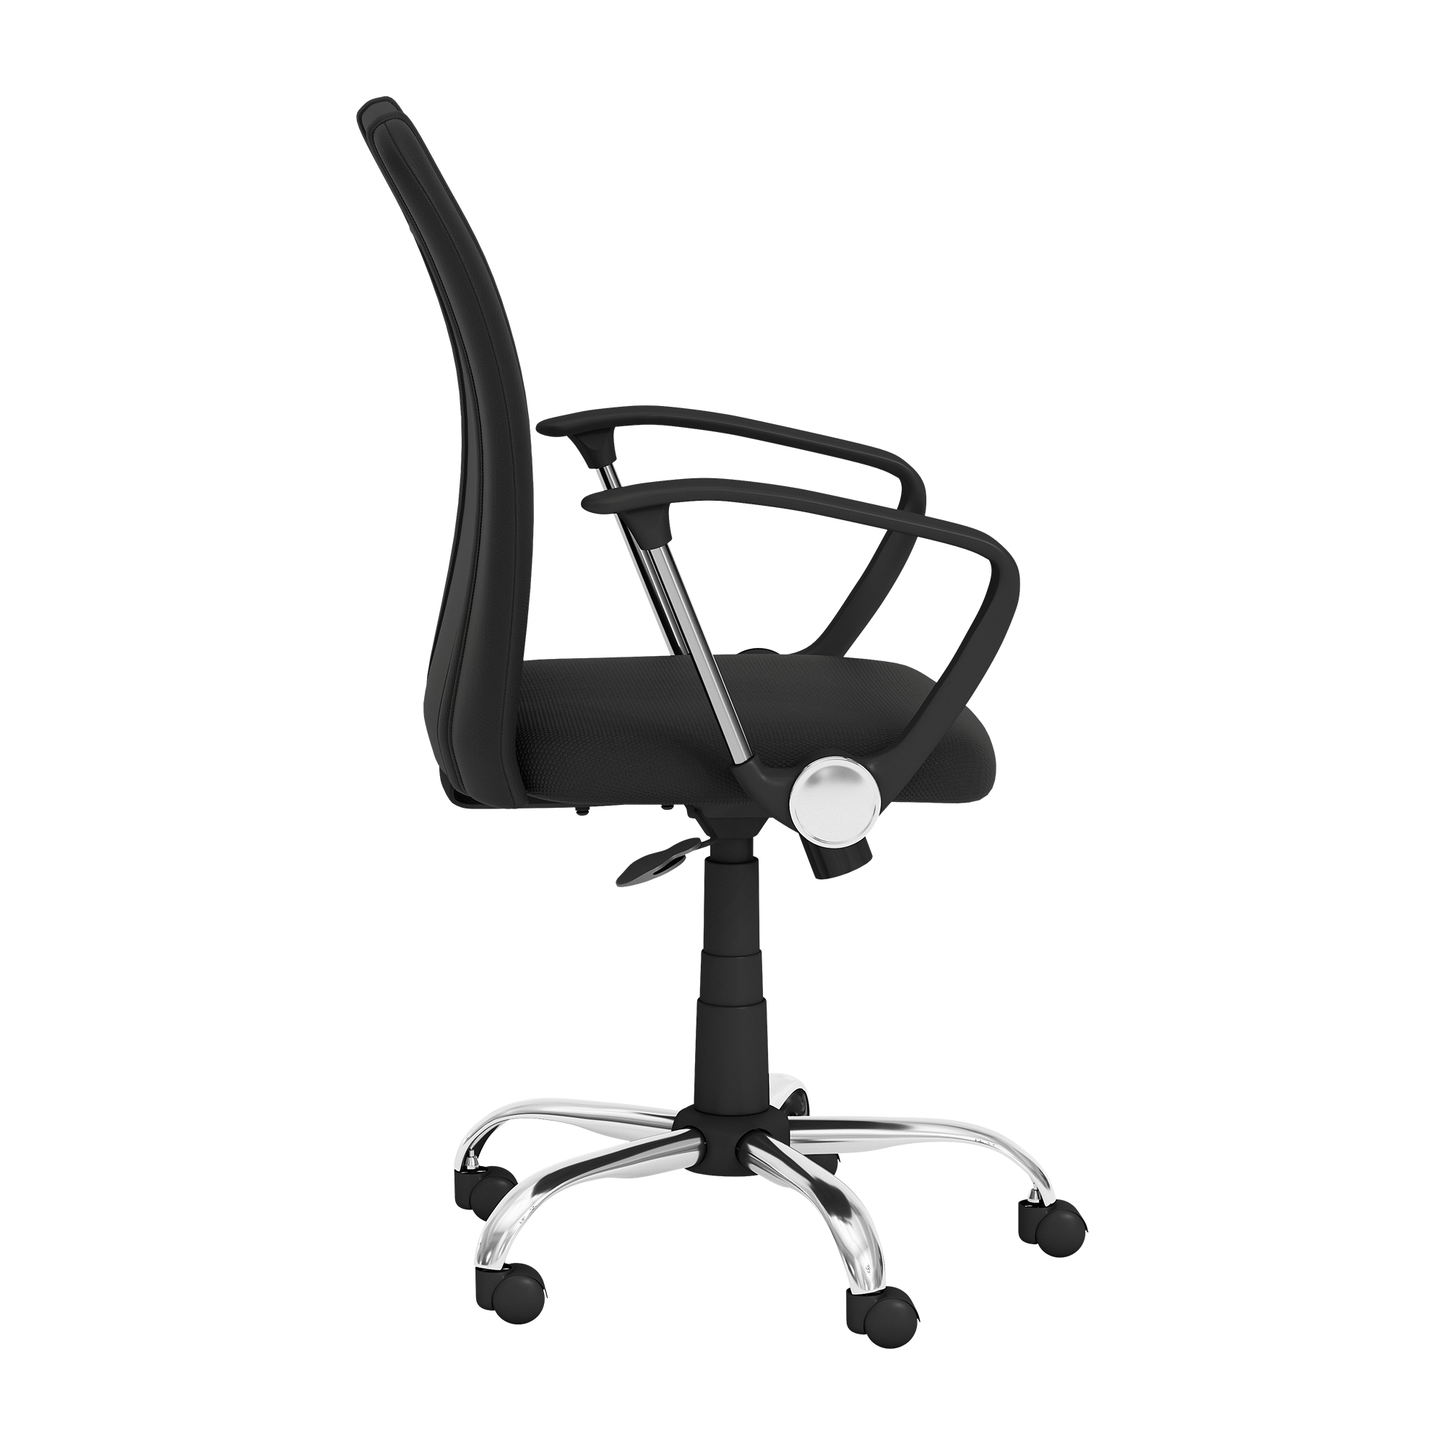 Curve Task Chair with Denver Nuggets Logo